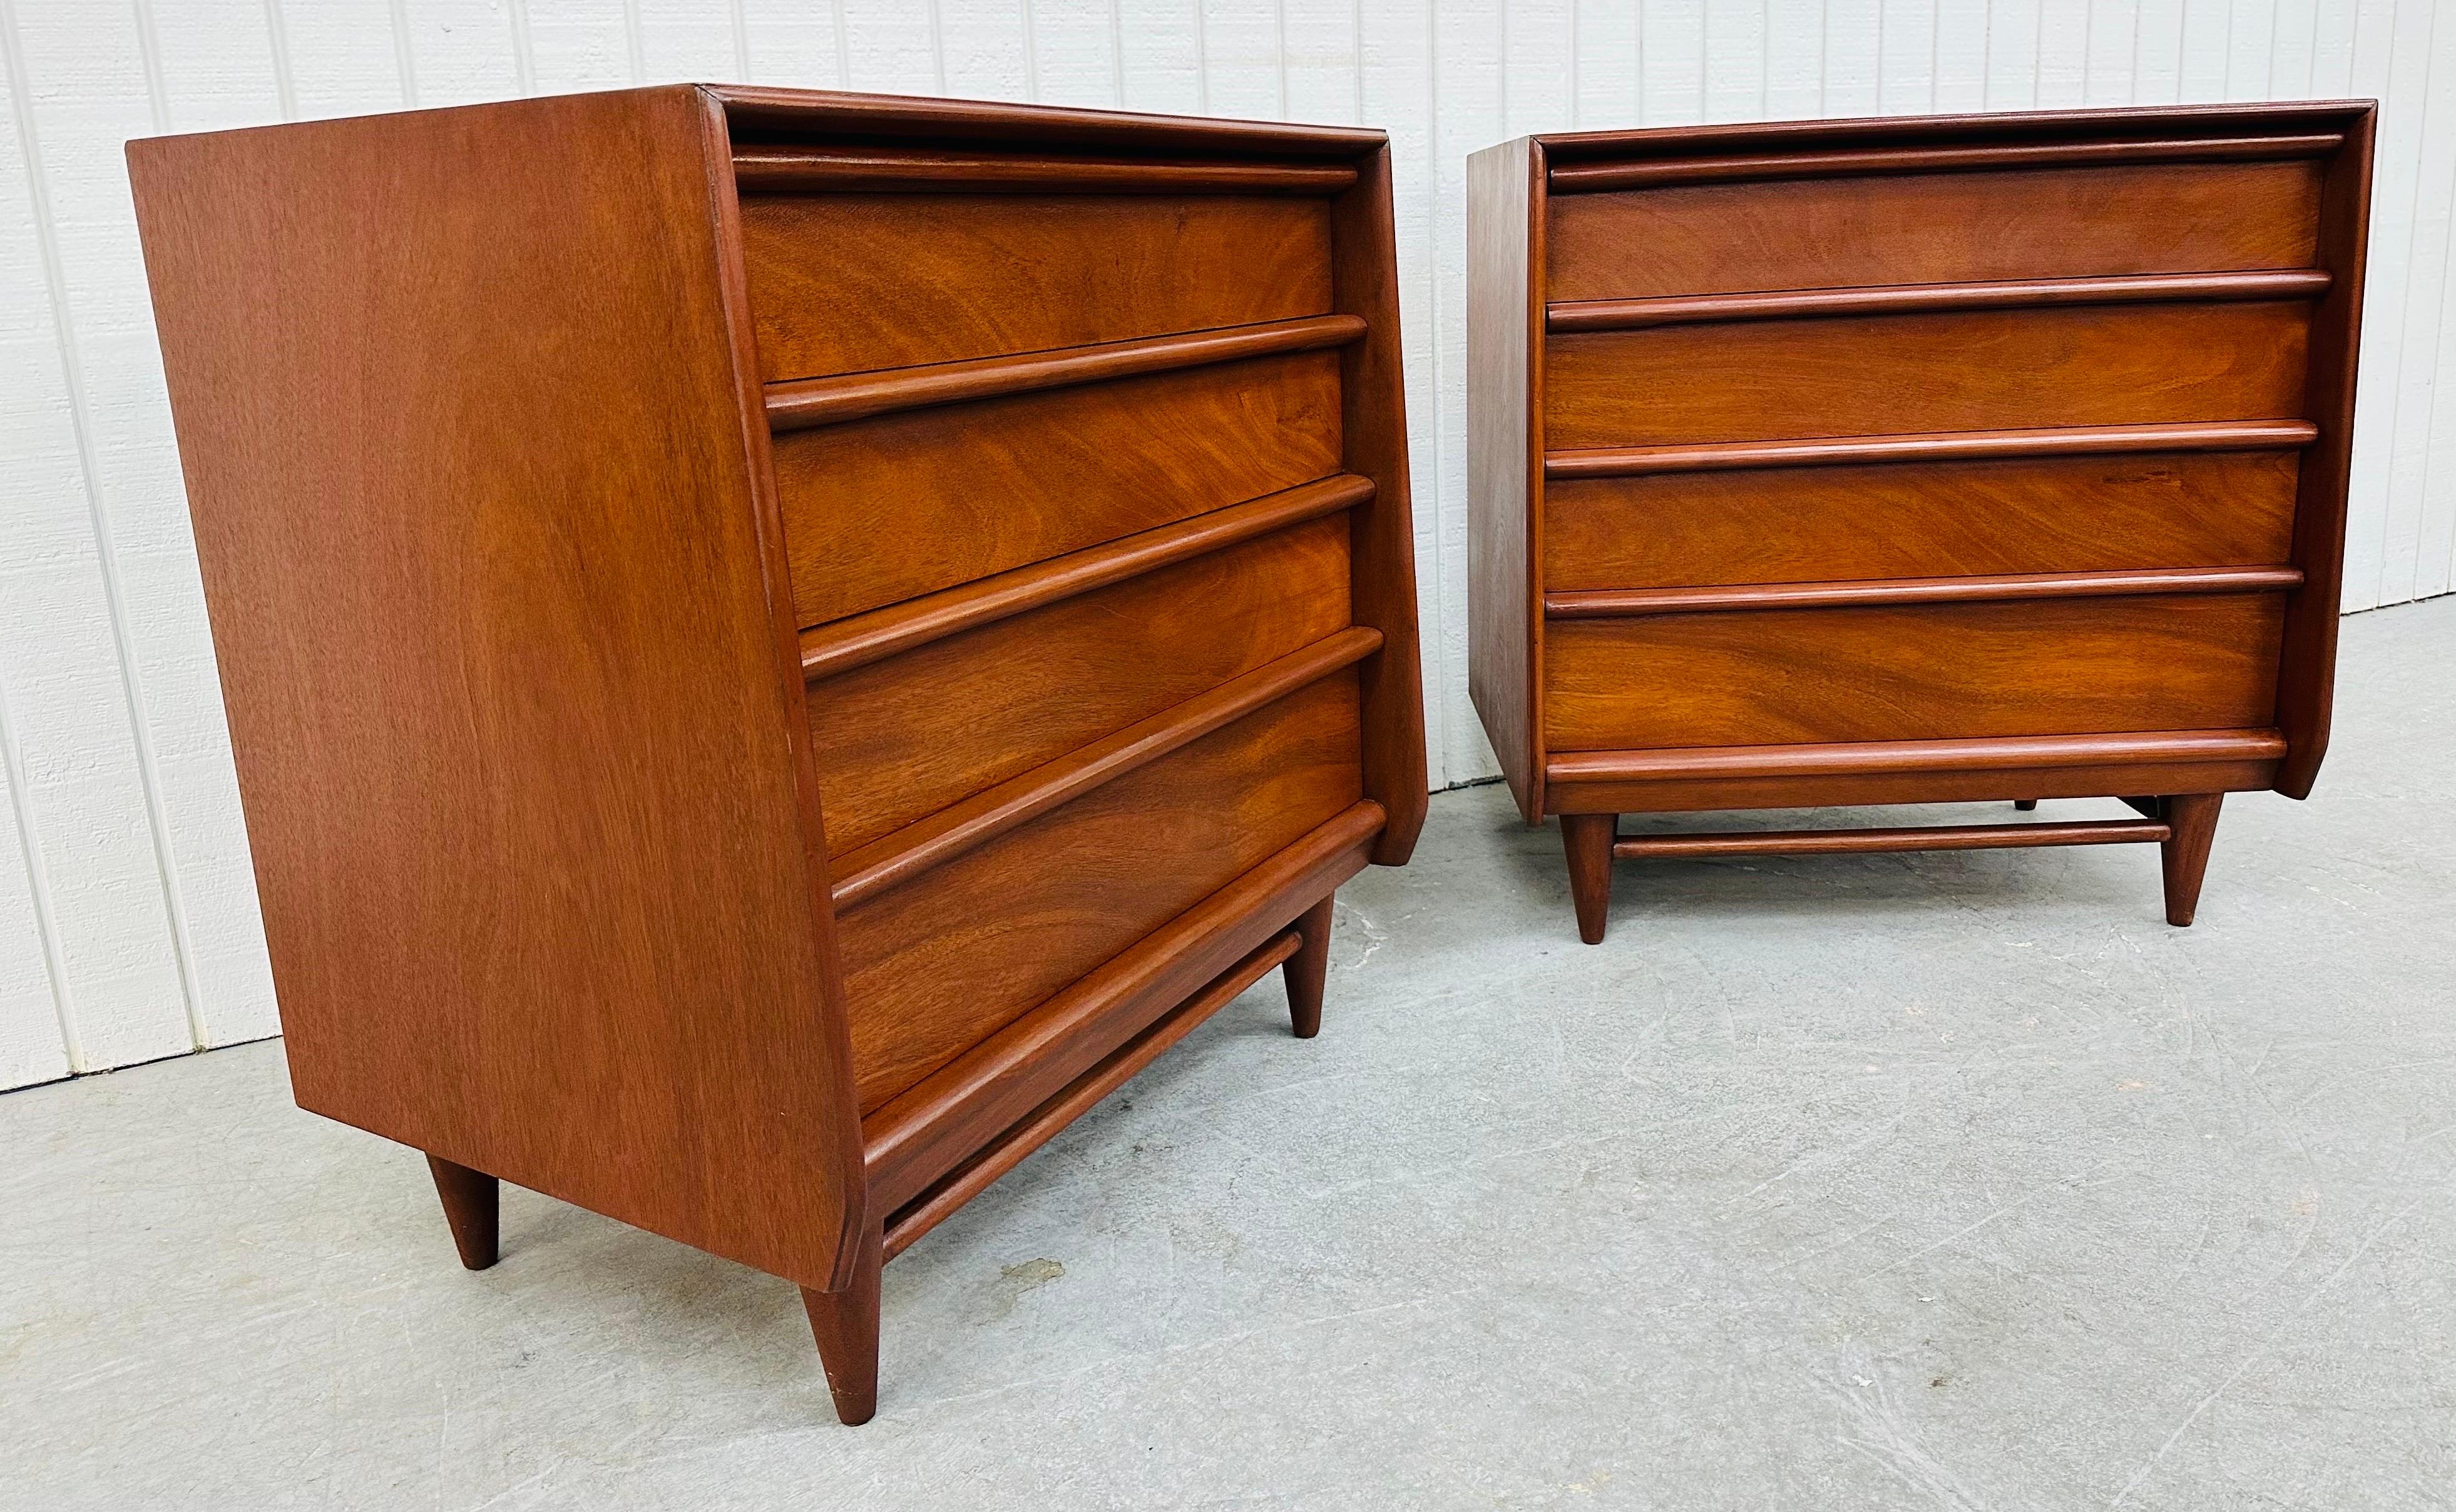 This listing is for a pair of Mid-Century Modern Walnut Bachelor Chests. Featuring a straight line design, wooden drawer pulls, three drawers for storage, and a beautiful walnut finish. This is an exceptional combination of quality and design!